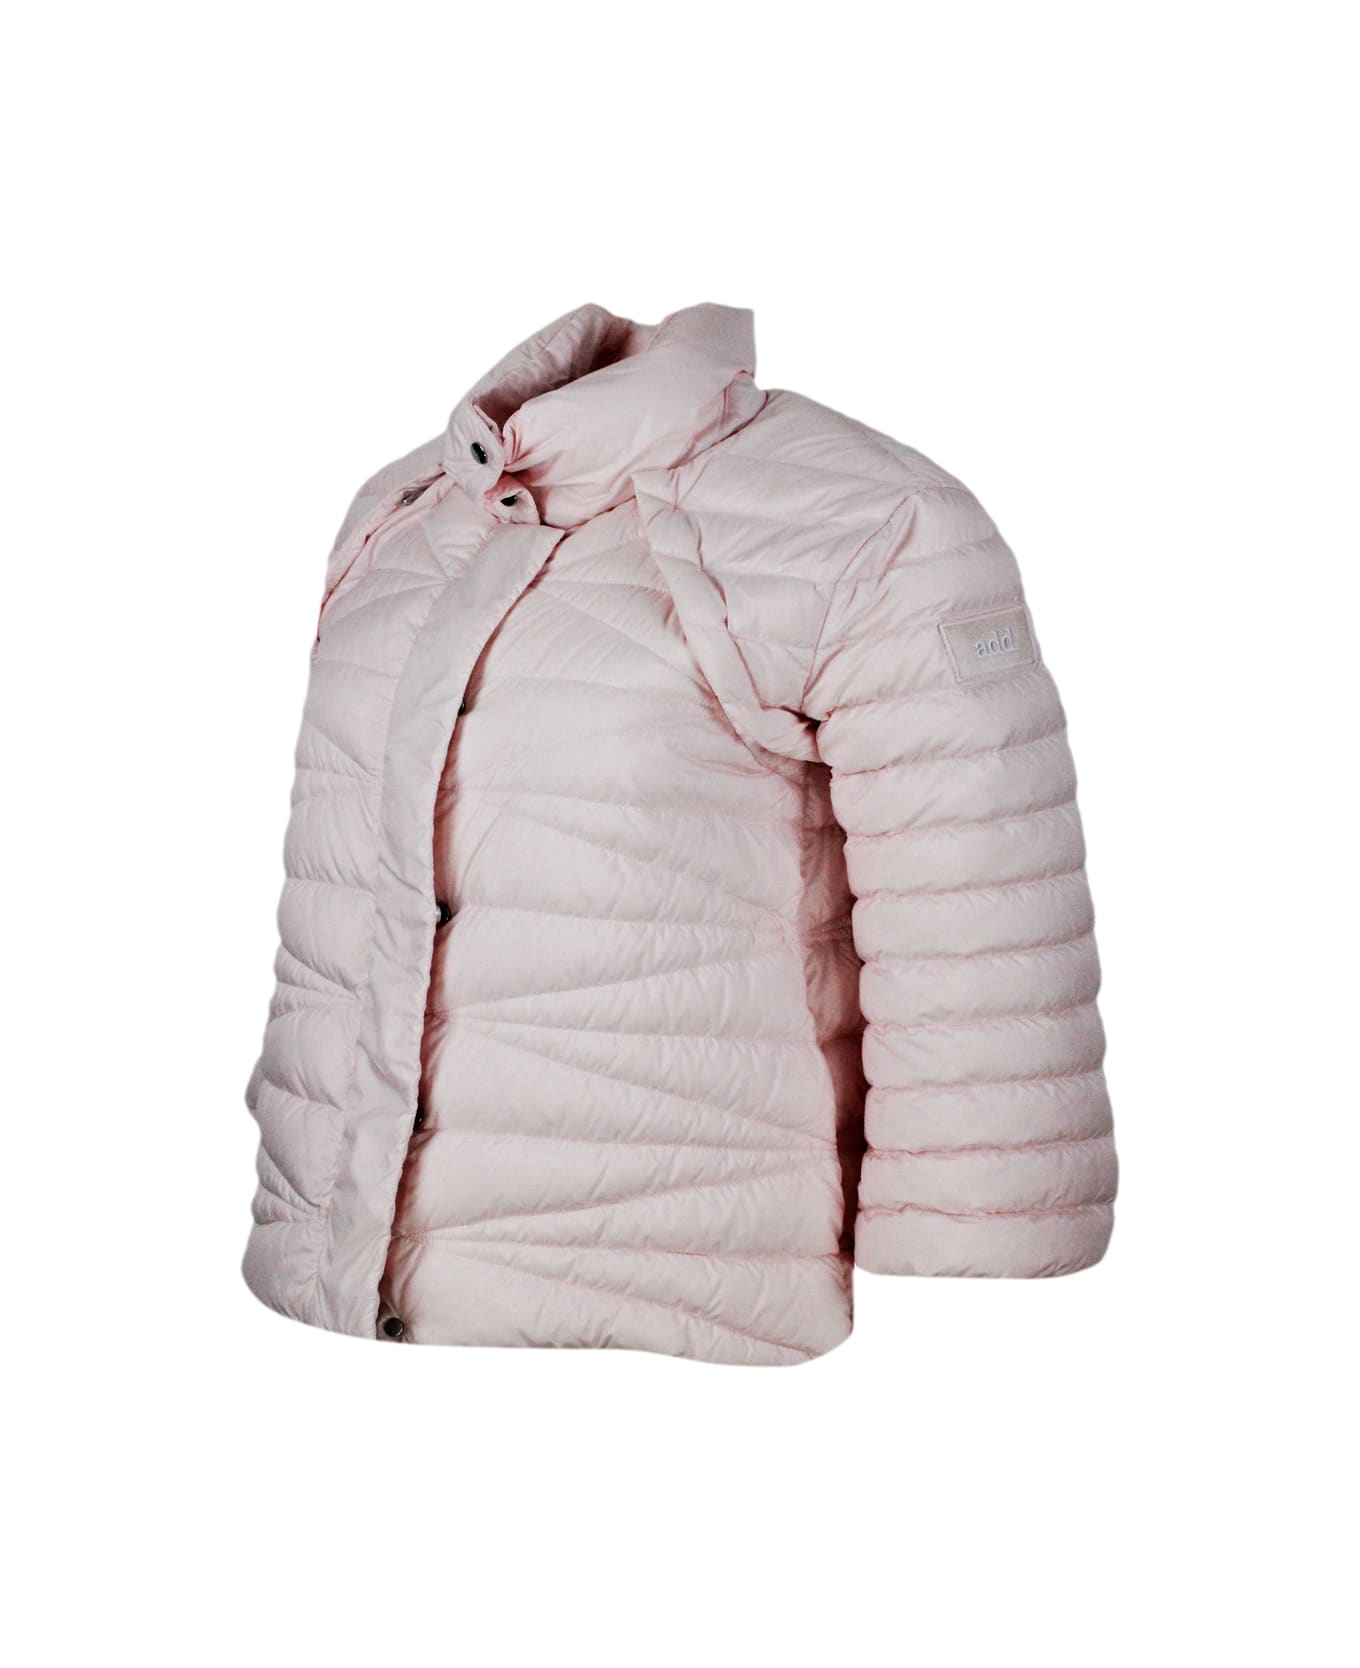 Add 100 Gram Down Jacket With High Quality Feathers. The Sleeves Are Detachable With A Convenient Zip. Side Pockets And Zip And Button Closure - Pink ダウンジャケット